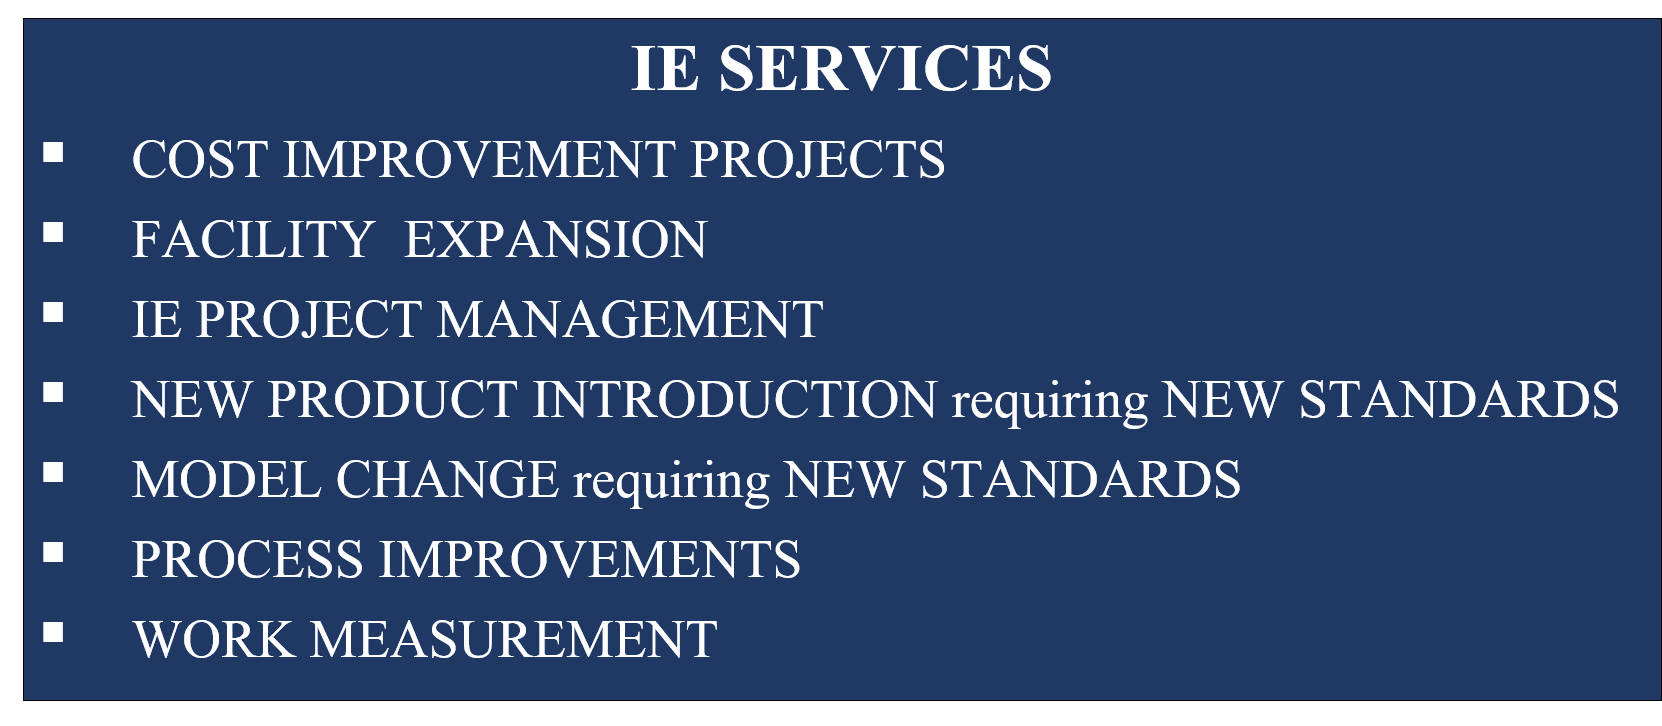 INDUSTRIAL ENGINEERING PROJECT MANAGEMENT BANNER.png